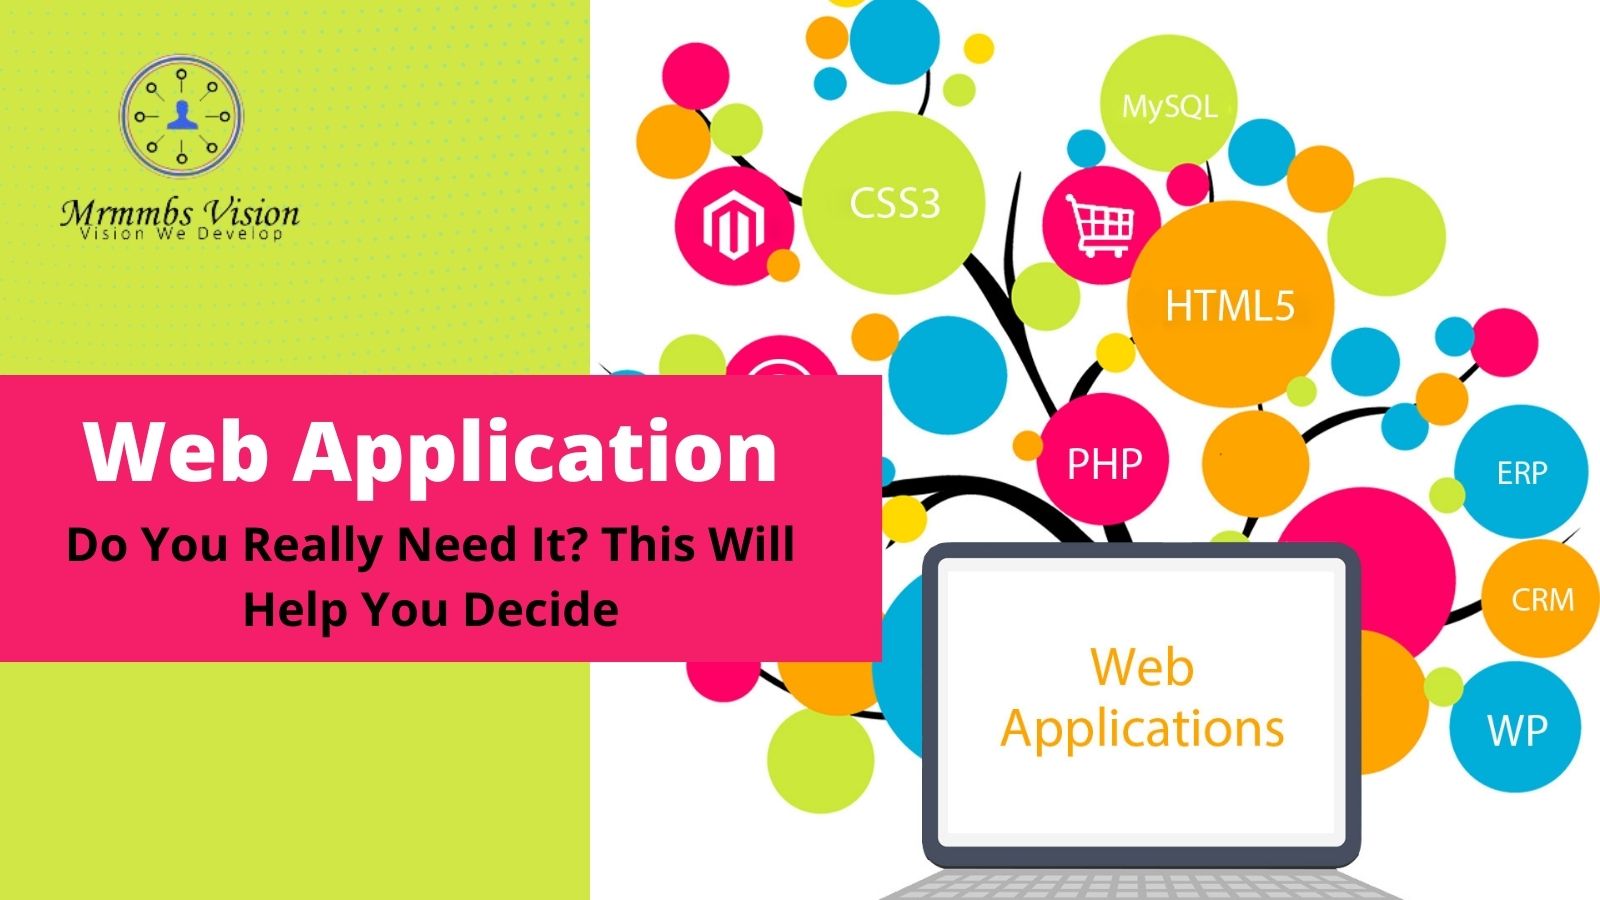 Web Application: Do You Really Need It? This Will Help You Decide